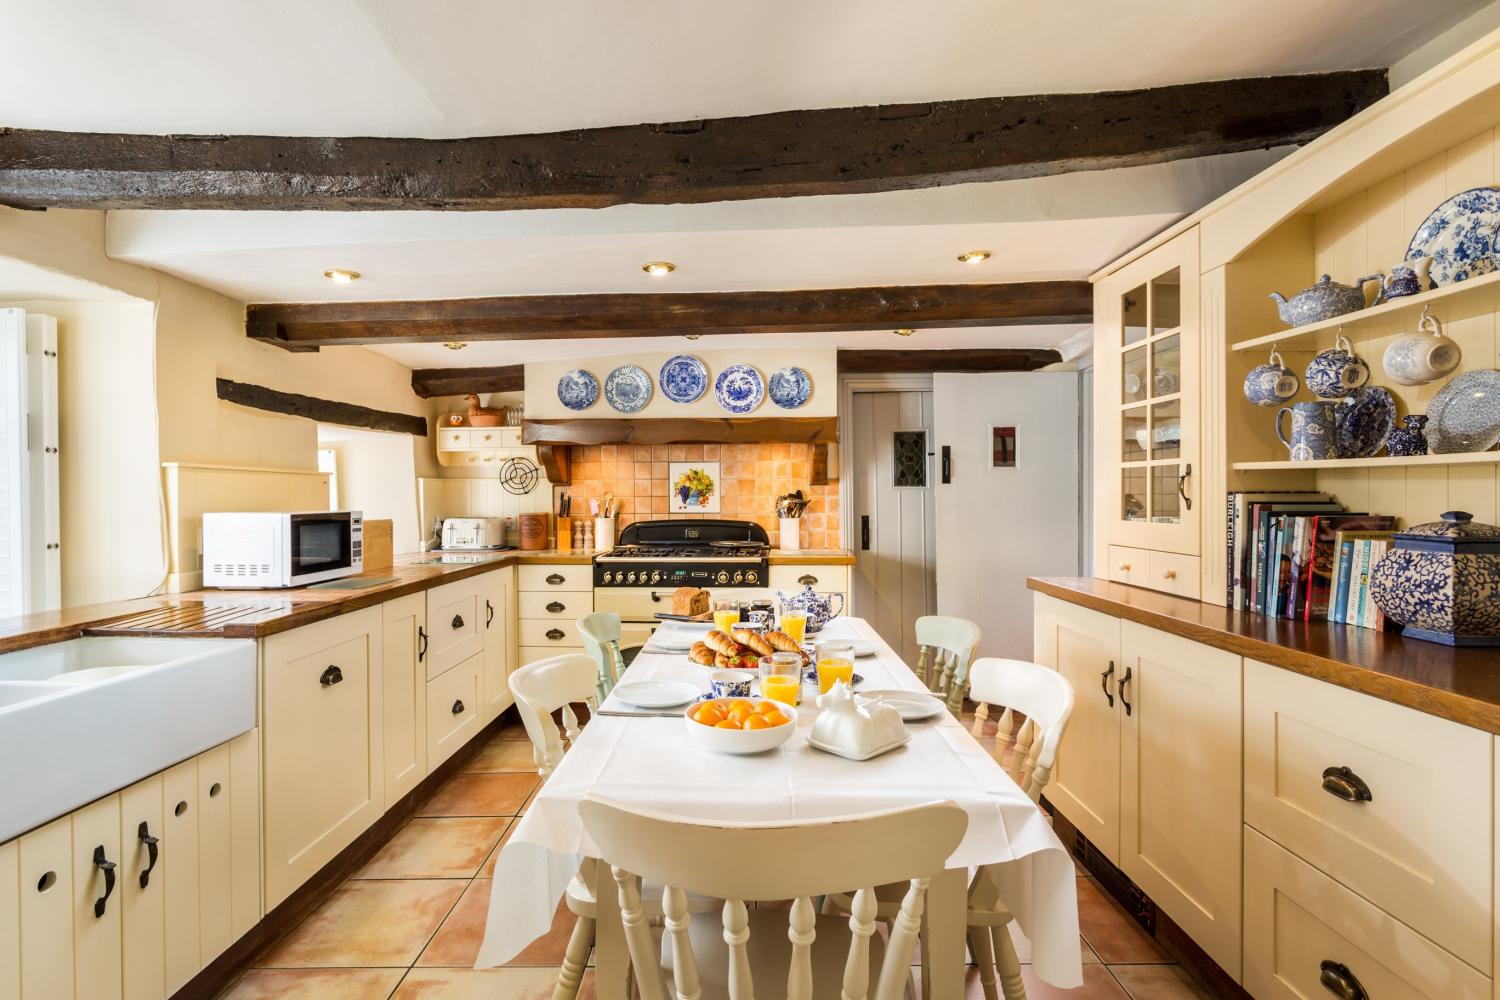 Our country style kitchen is well-equipped including a large gas range cooker.